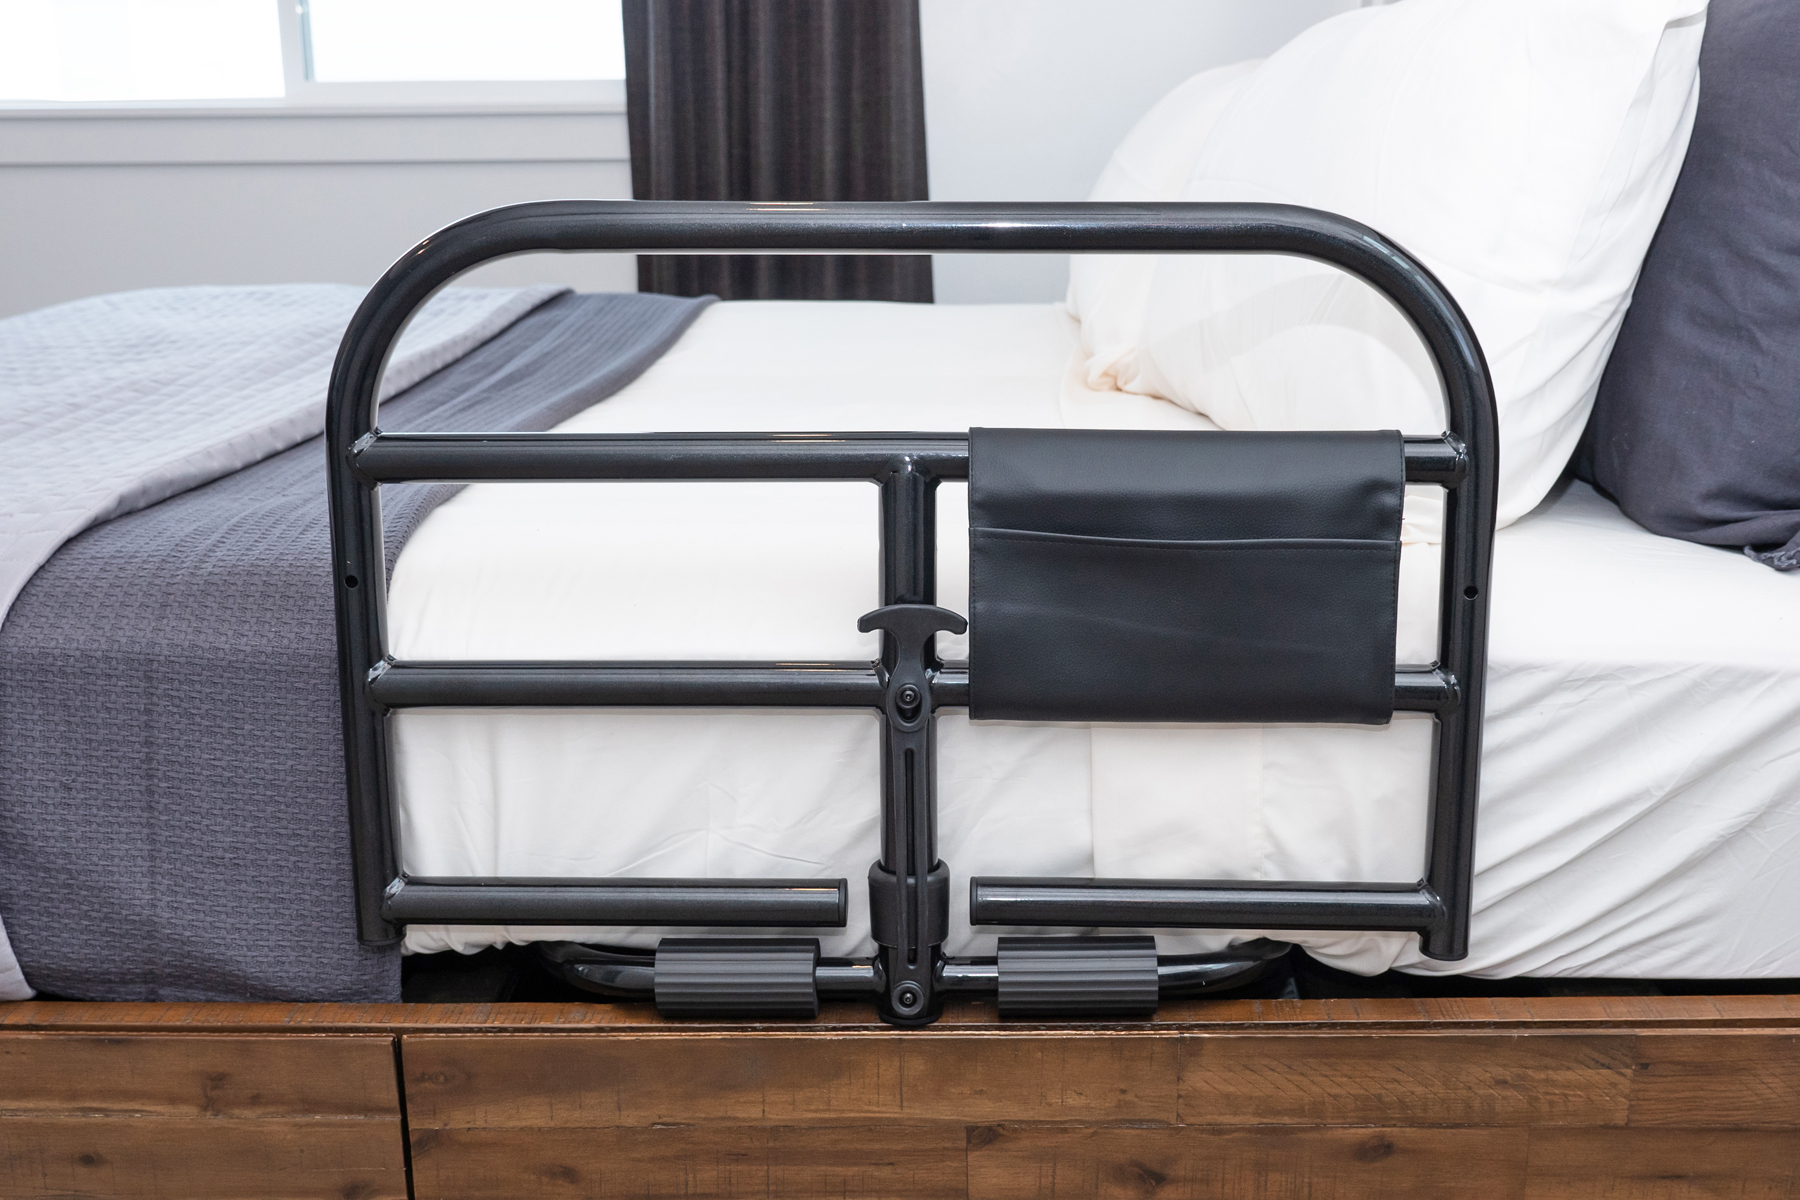 M-Rail Bedside Assist, The Reliable Bed Handrail